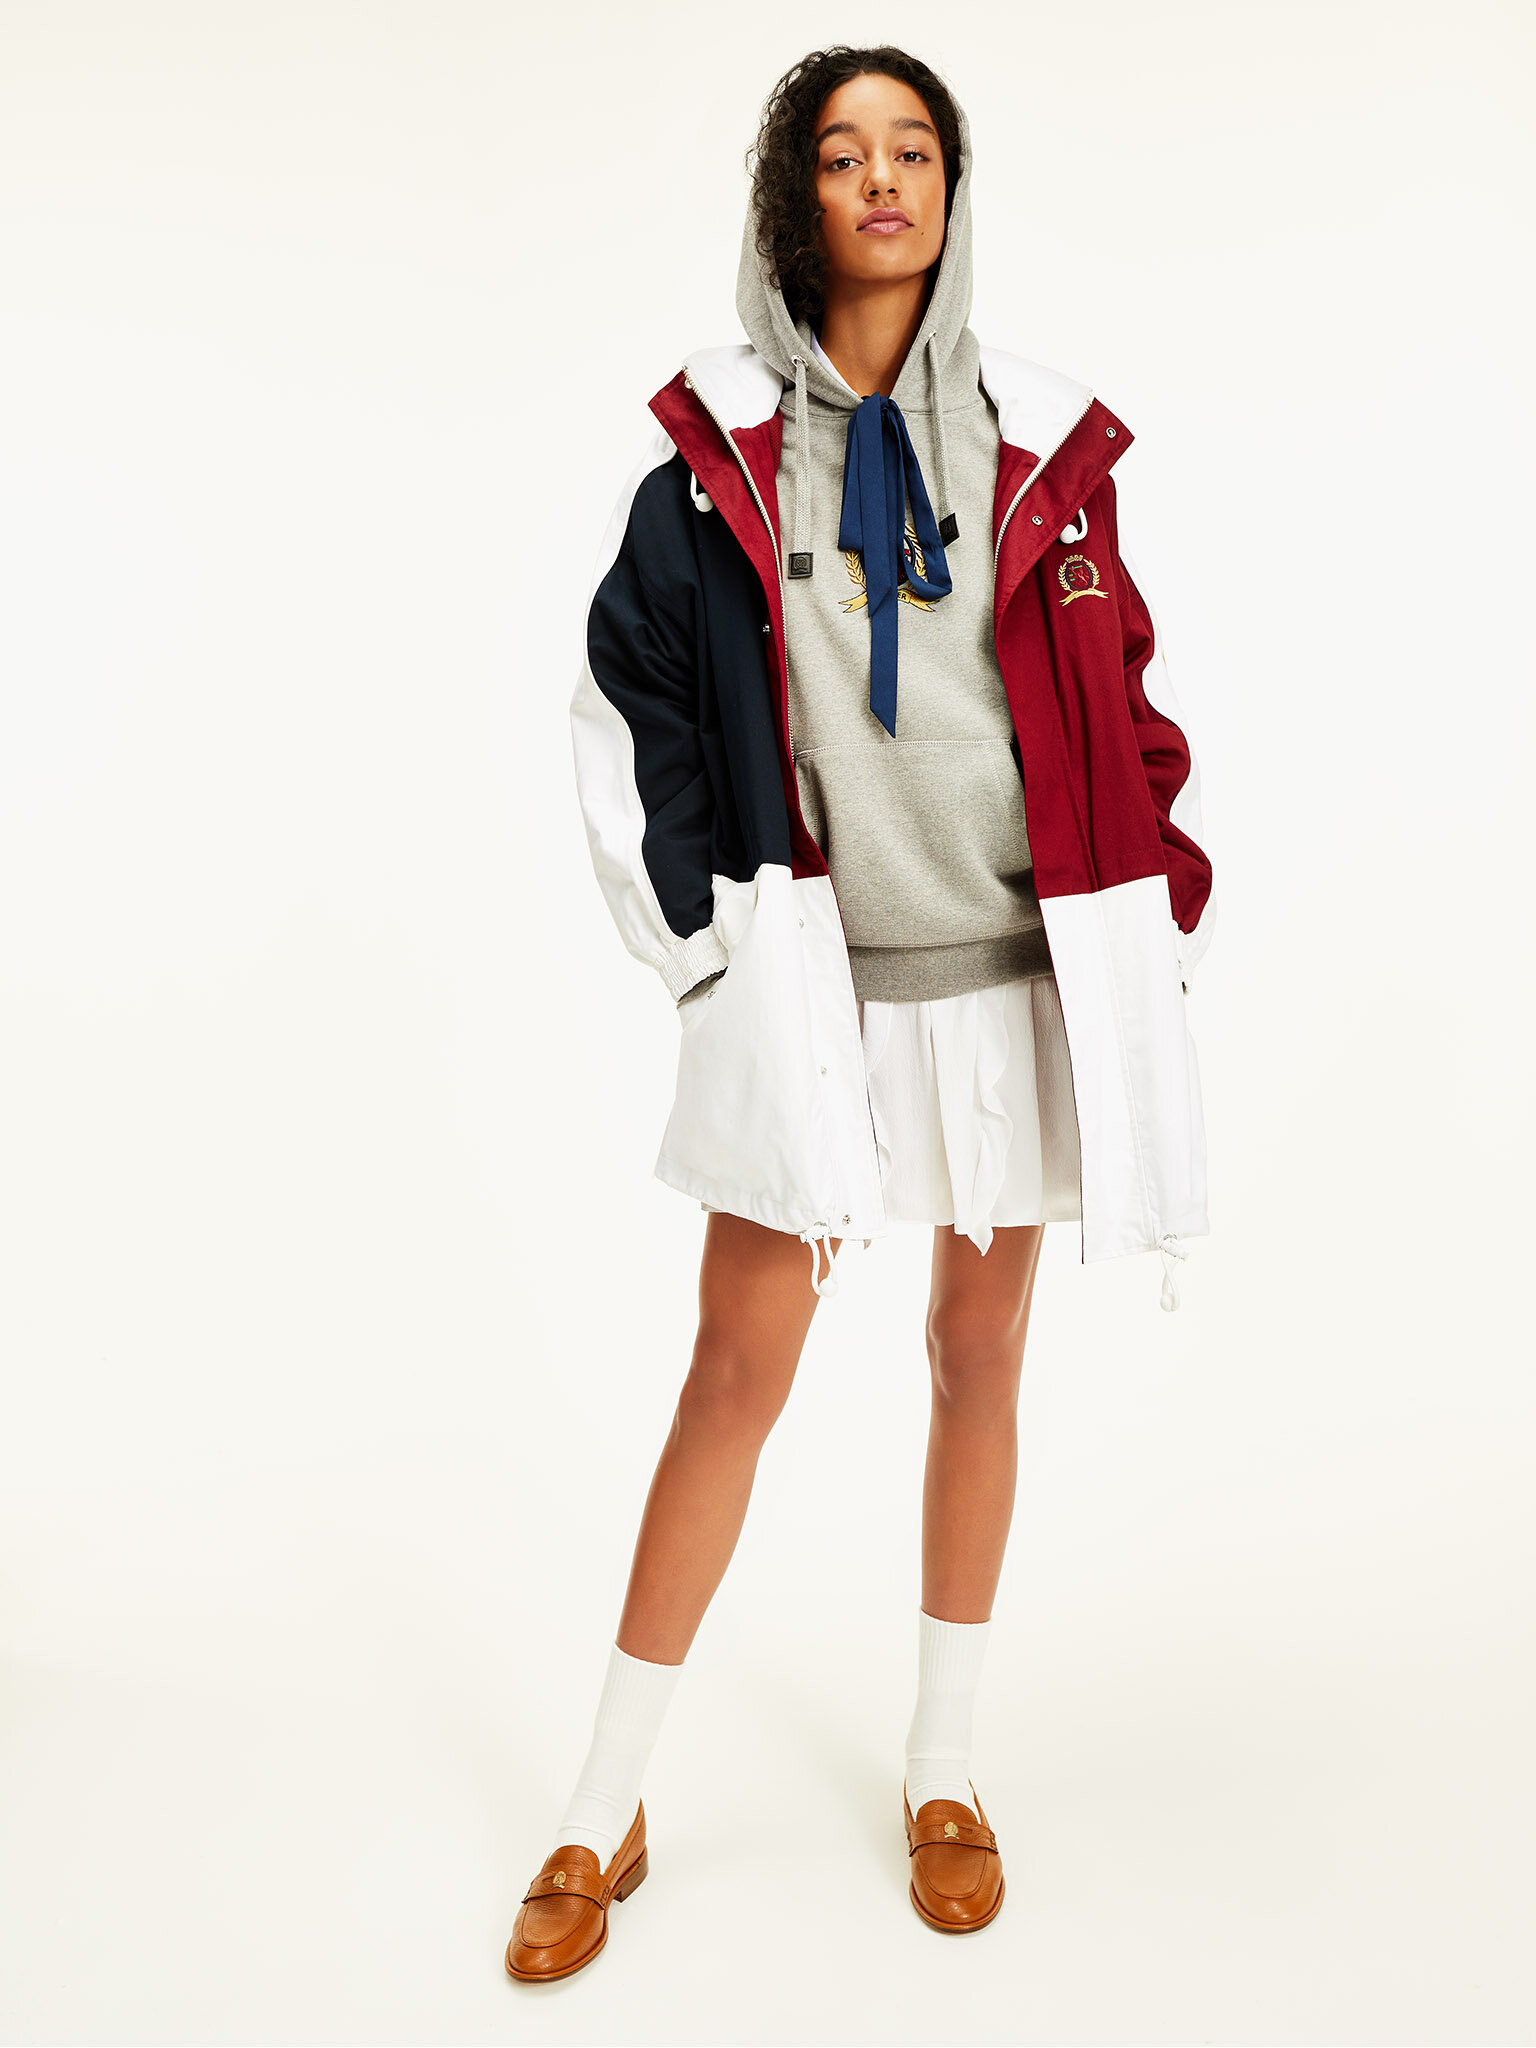 SP21_Tommy Hilfiger Collection_LOOK03.jpg